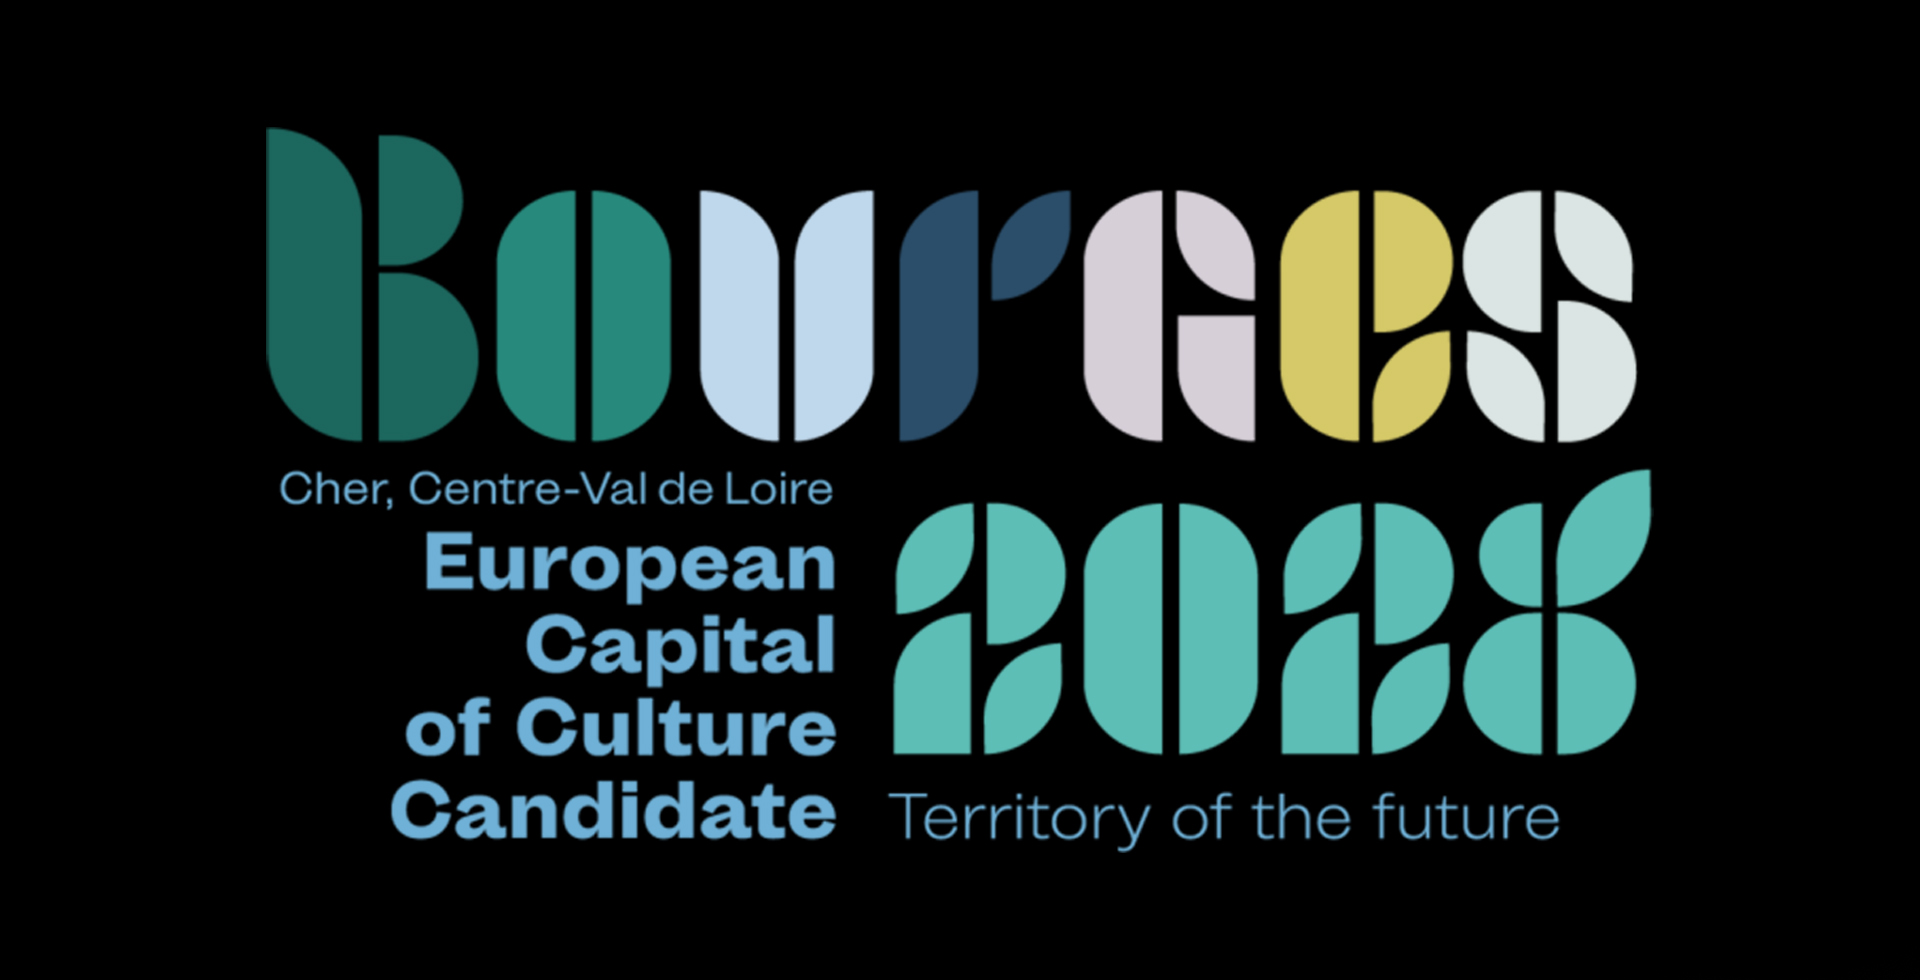 Bourges European Capital of Culture 2028